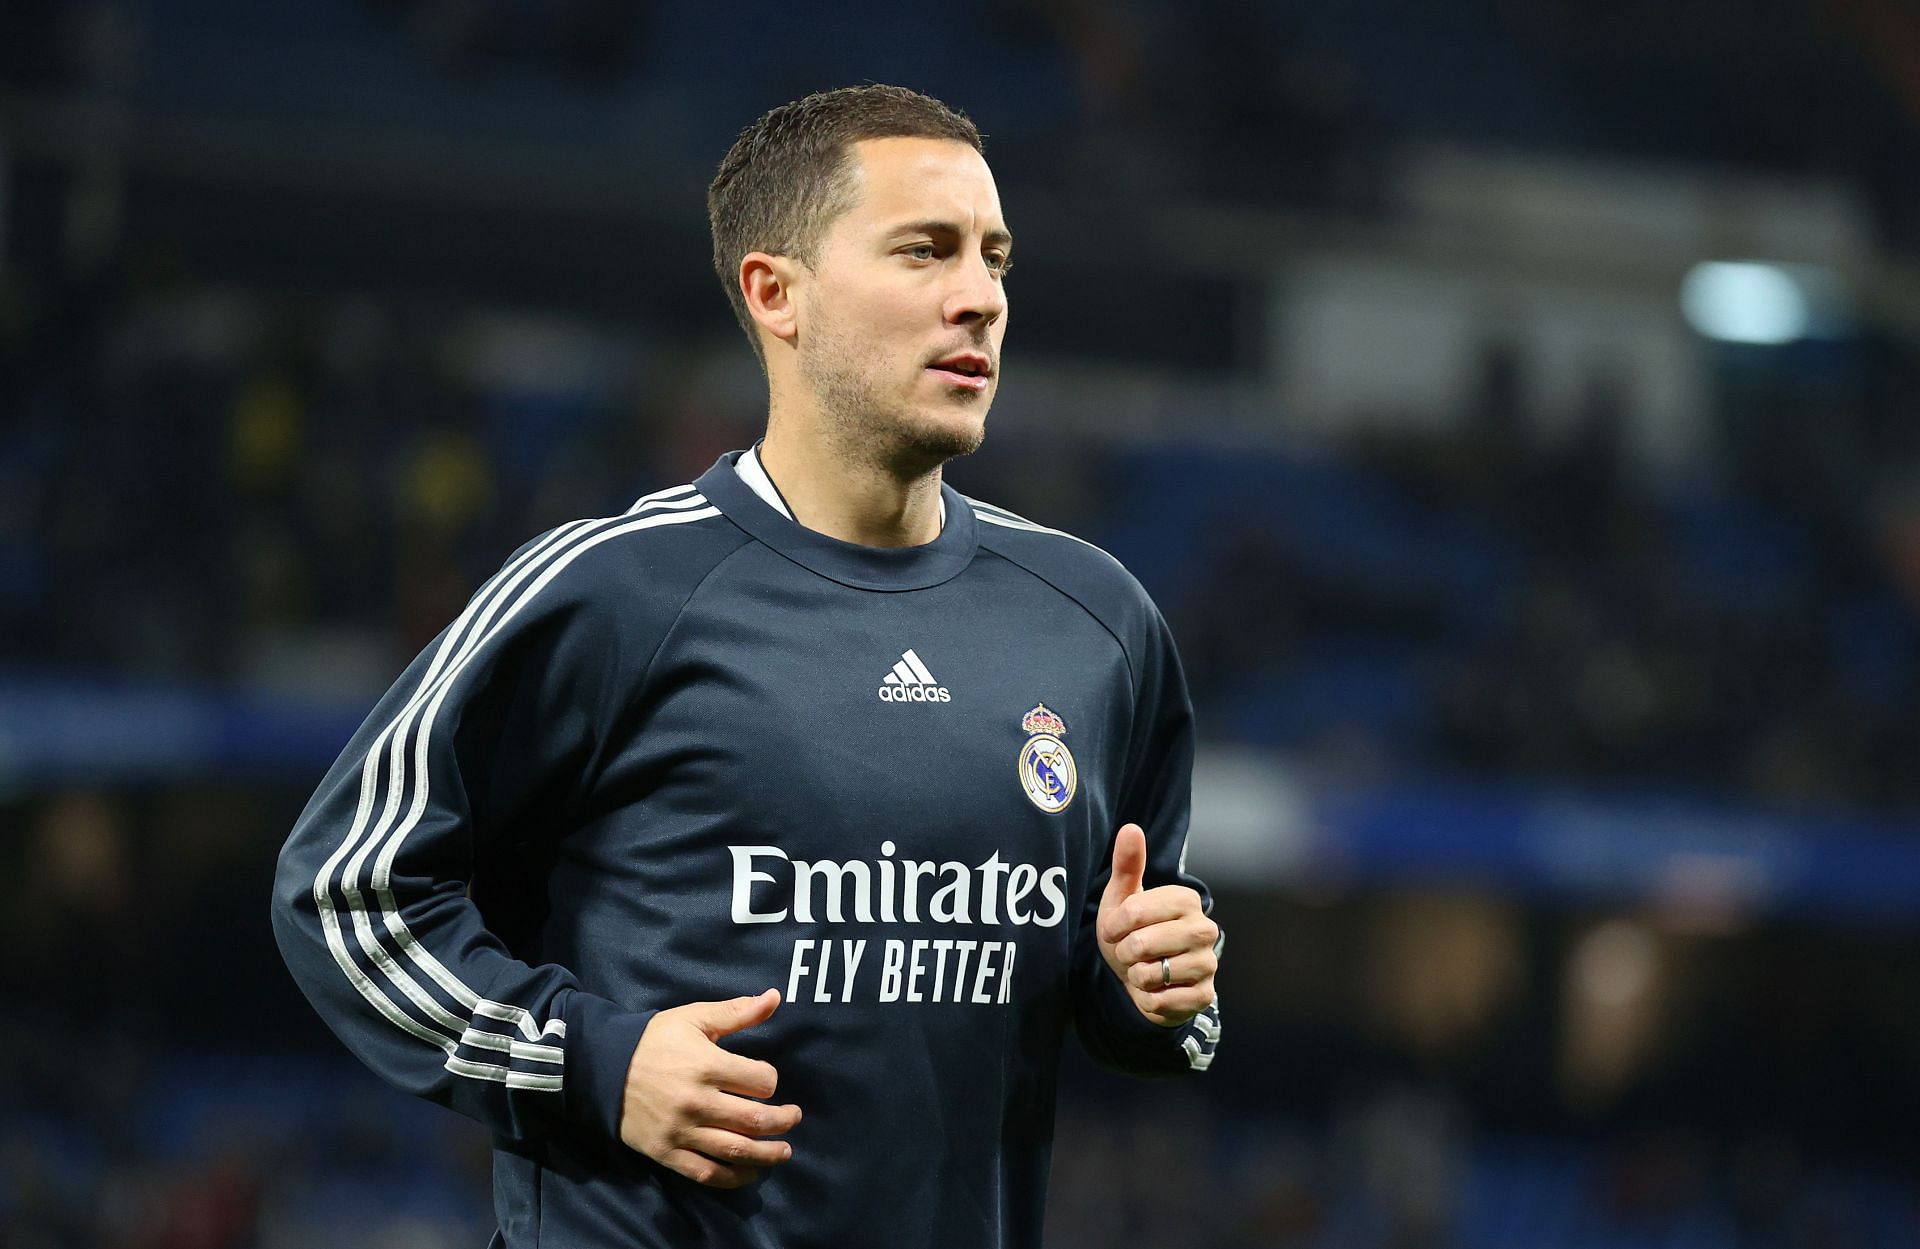 Real Madrid negotiating loan move with Chelsea for Eden Hazard- Reports